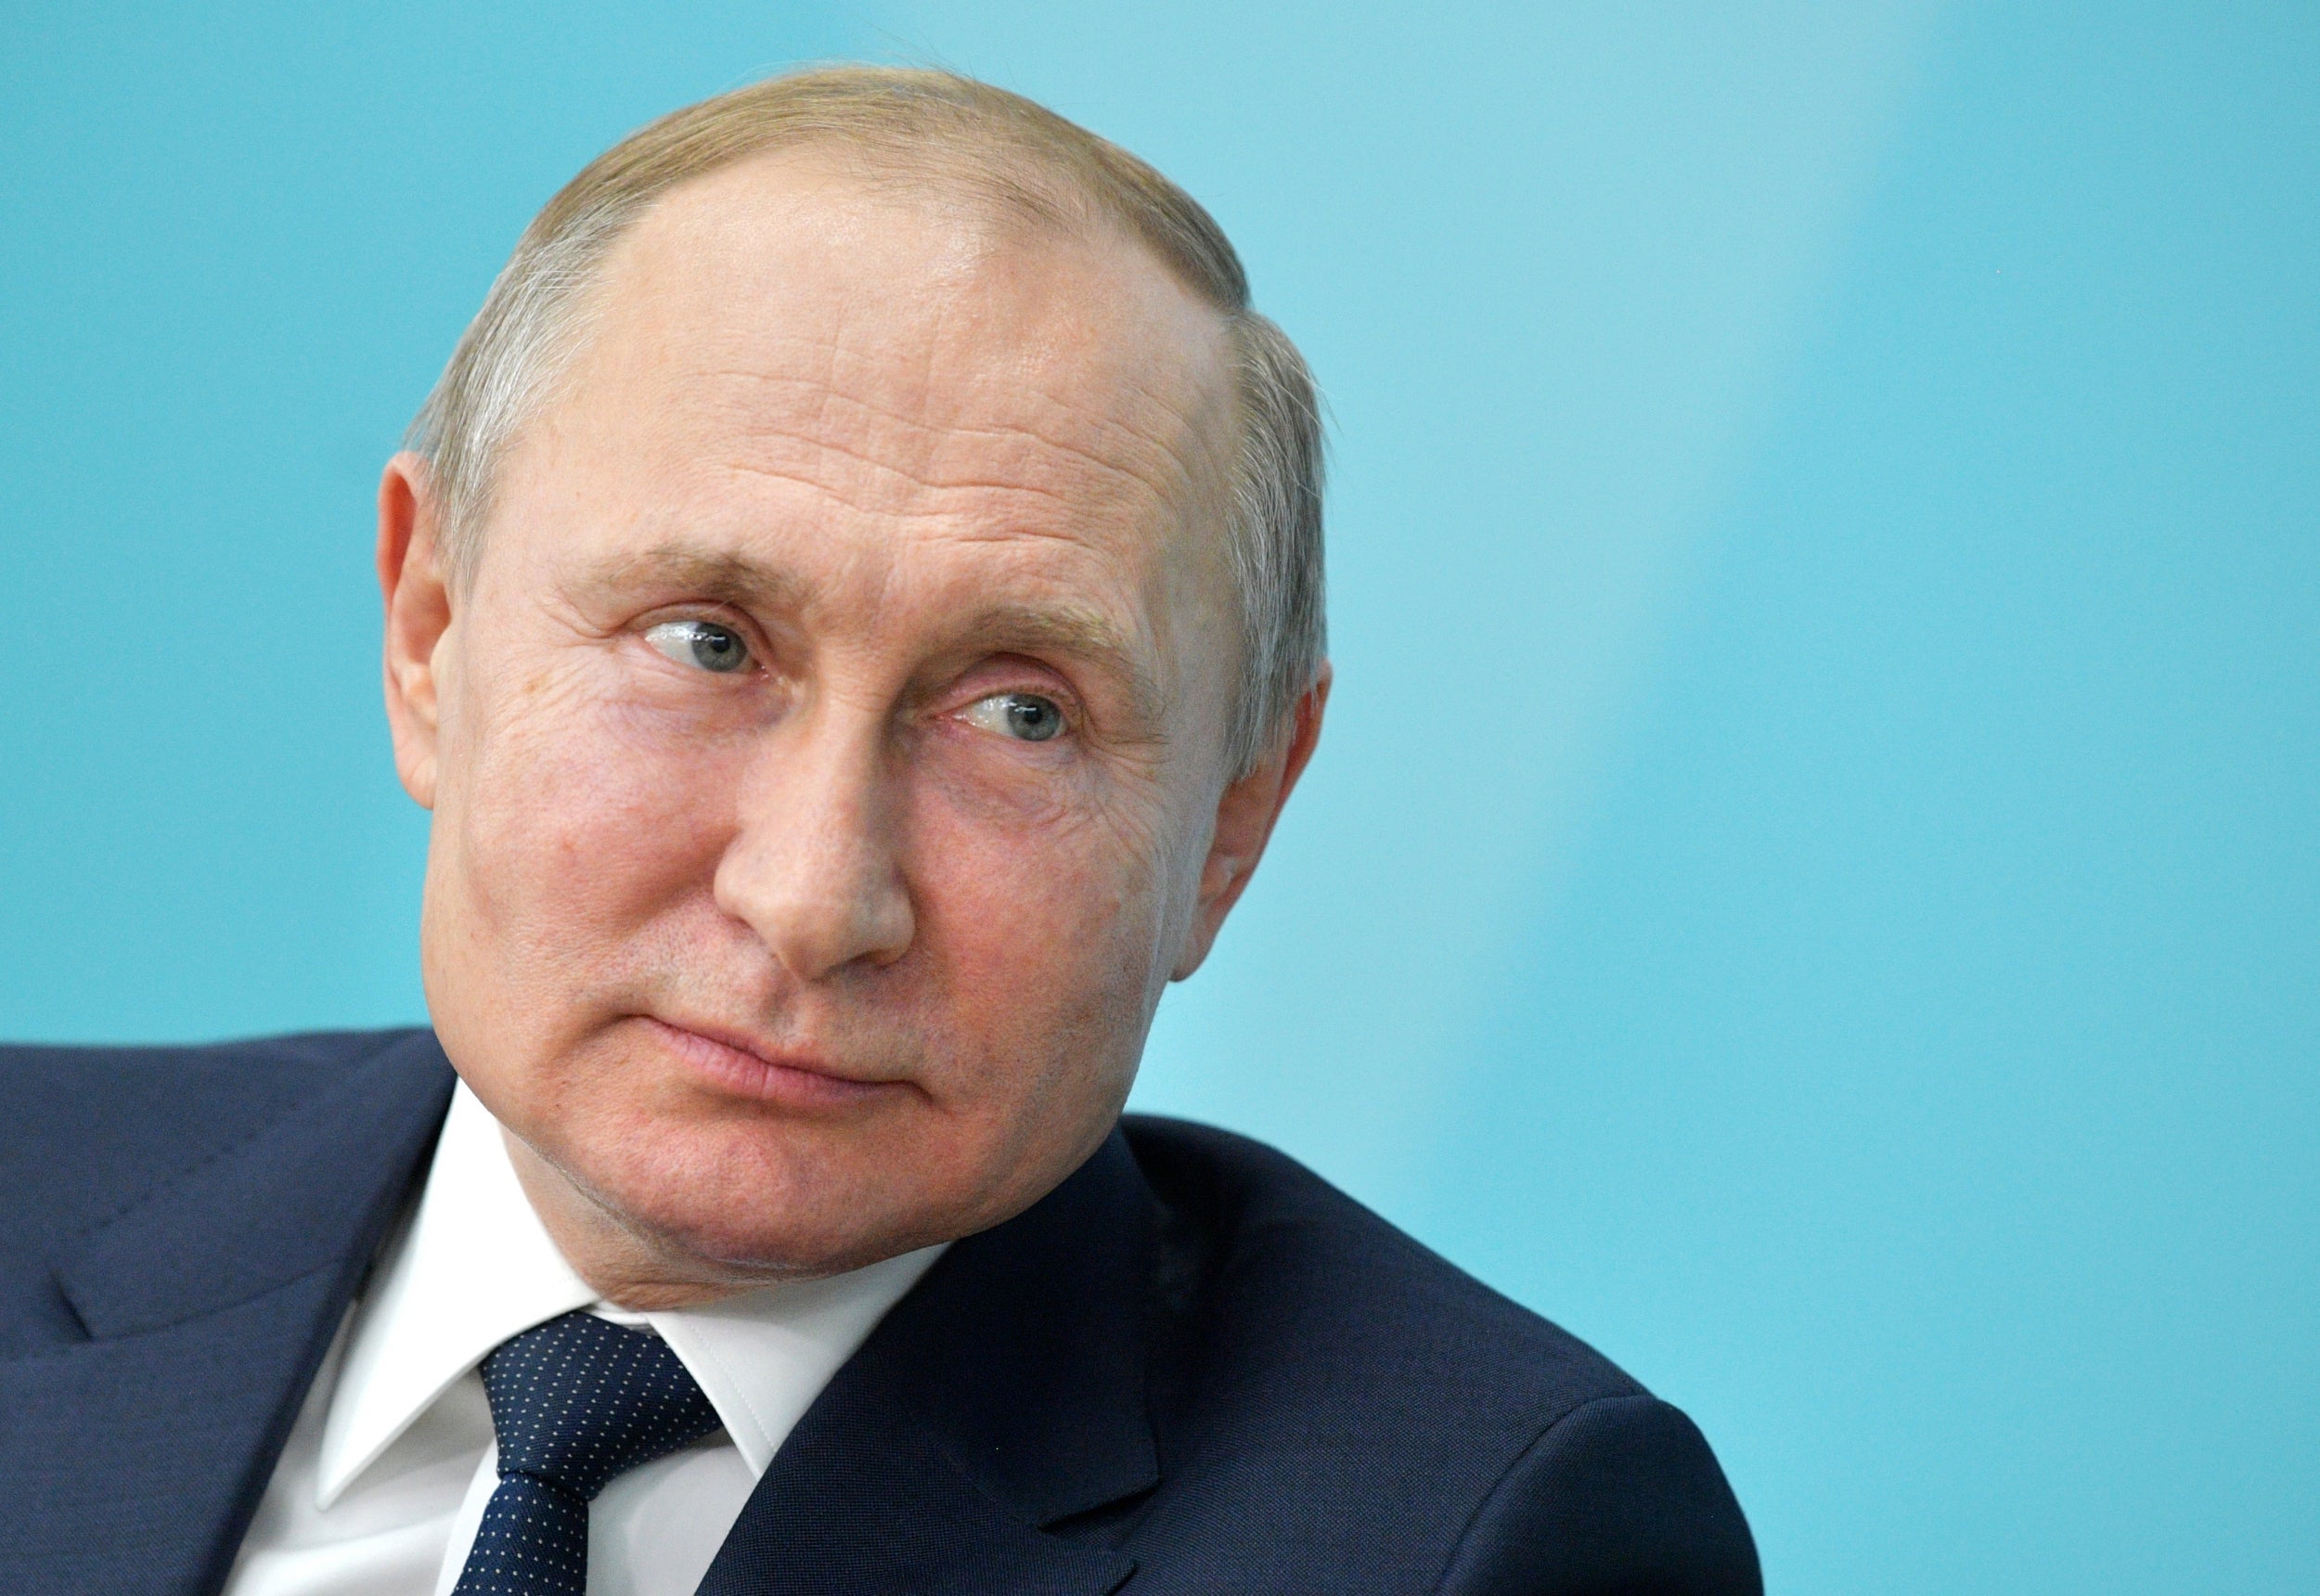 Putin doesn’t want to go down ‘as a bumbling old Brezhnev-type figure’